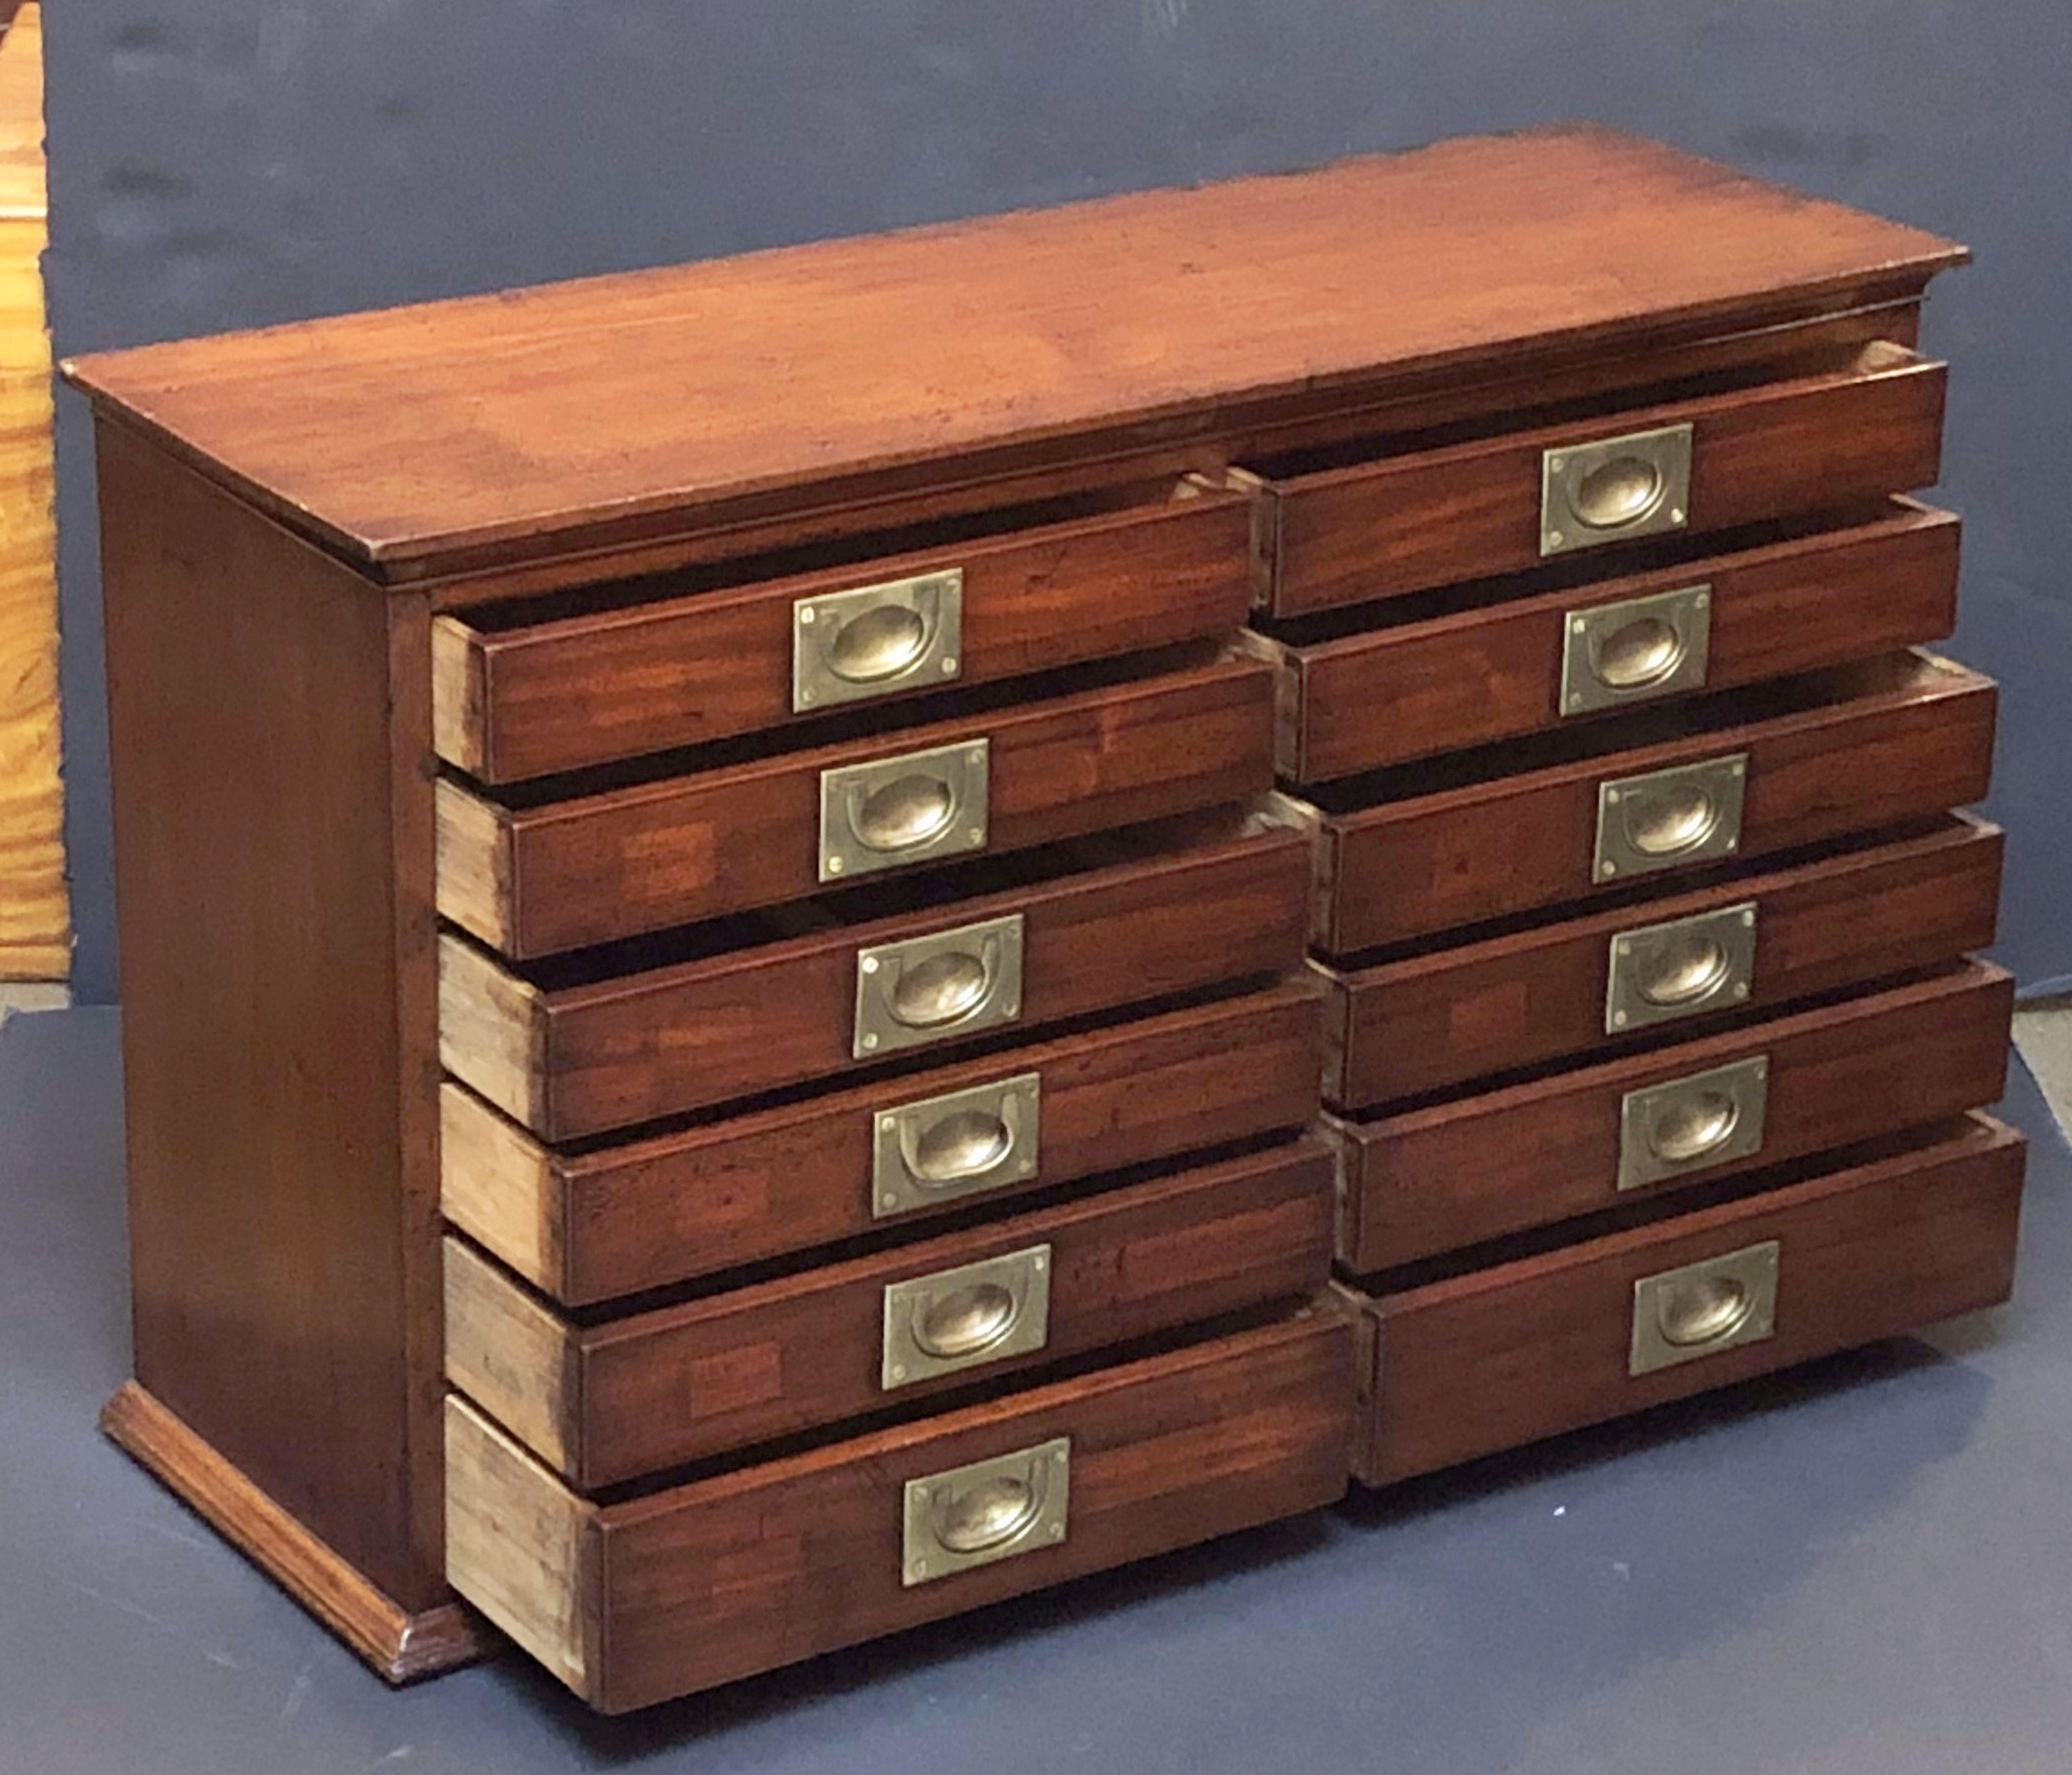 British Military Campaign Flight of Drawers with Brass Hardware 1